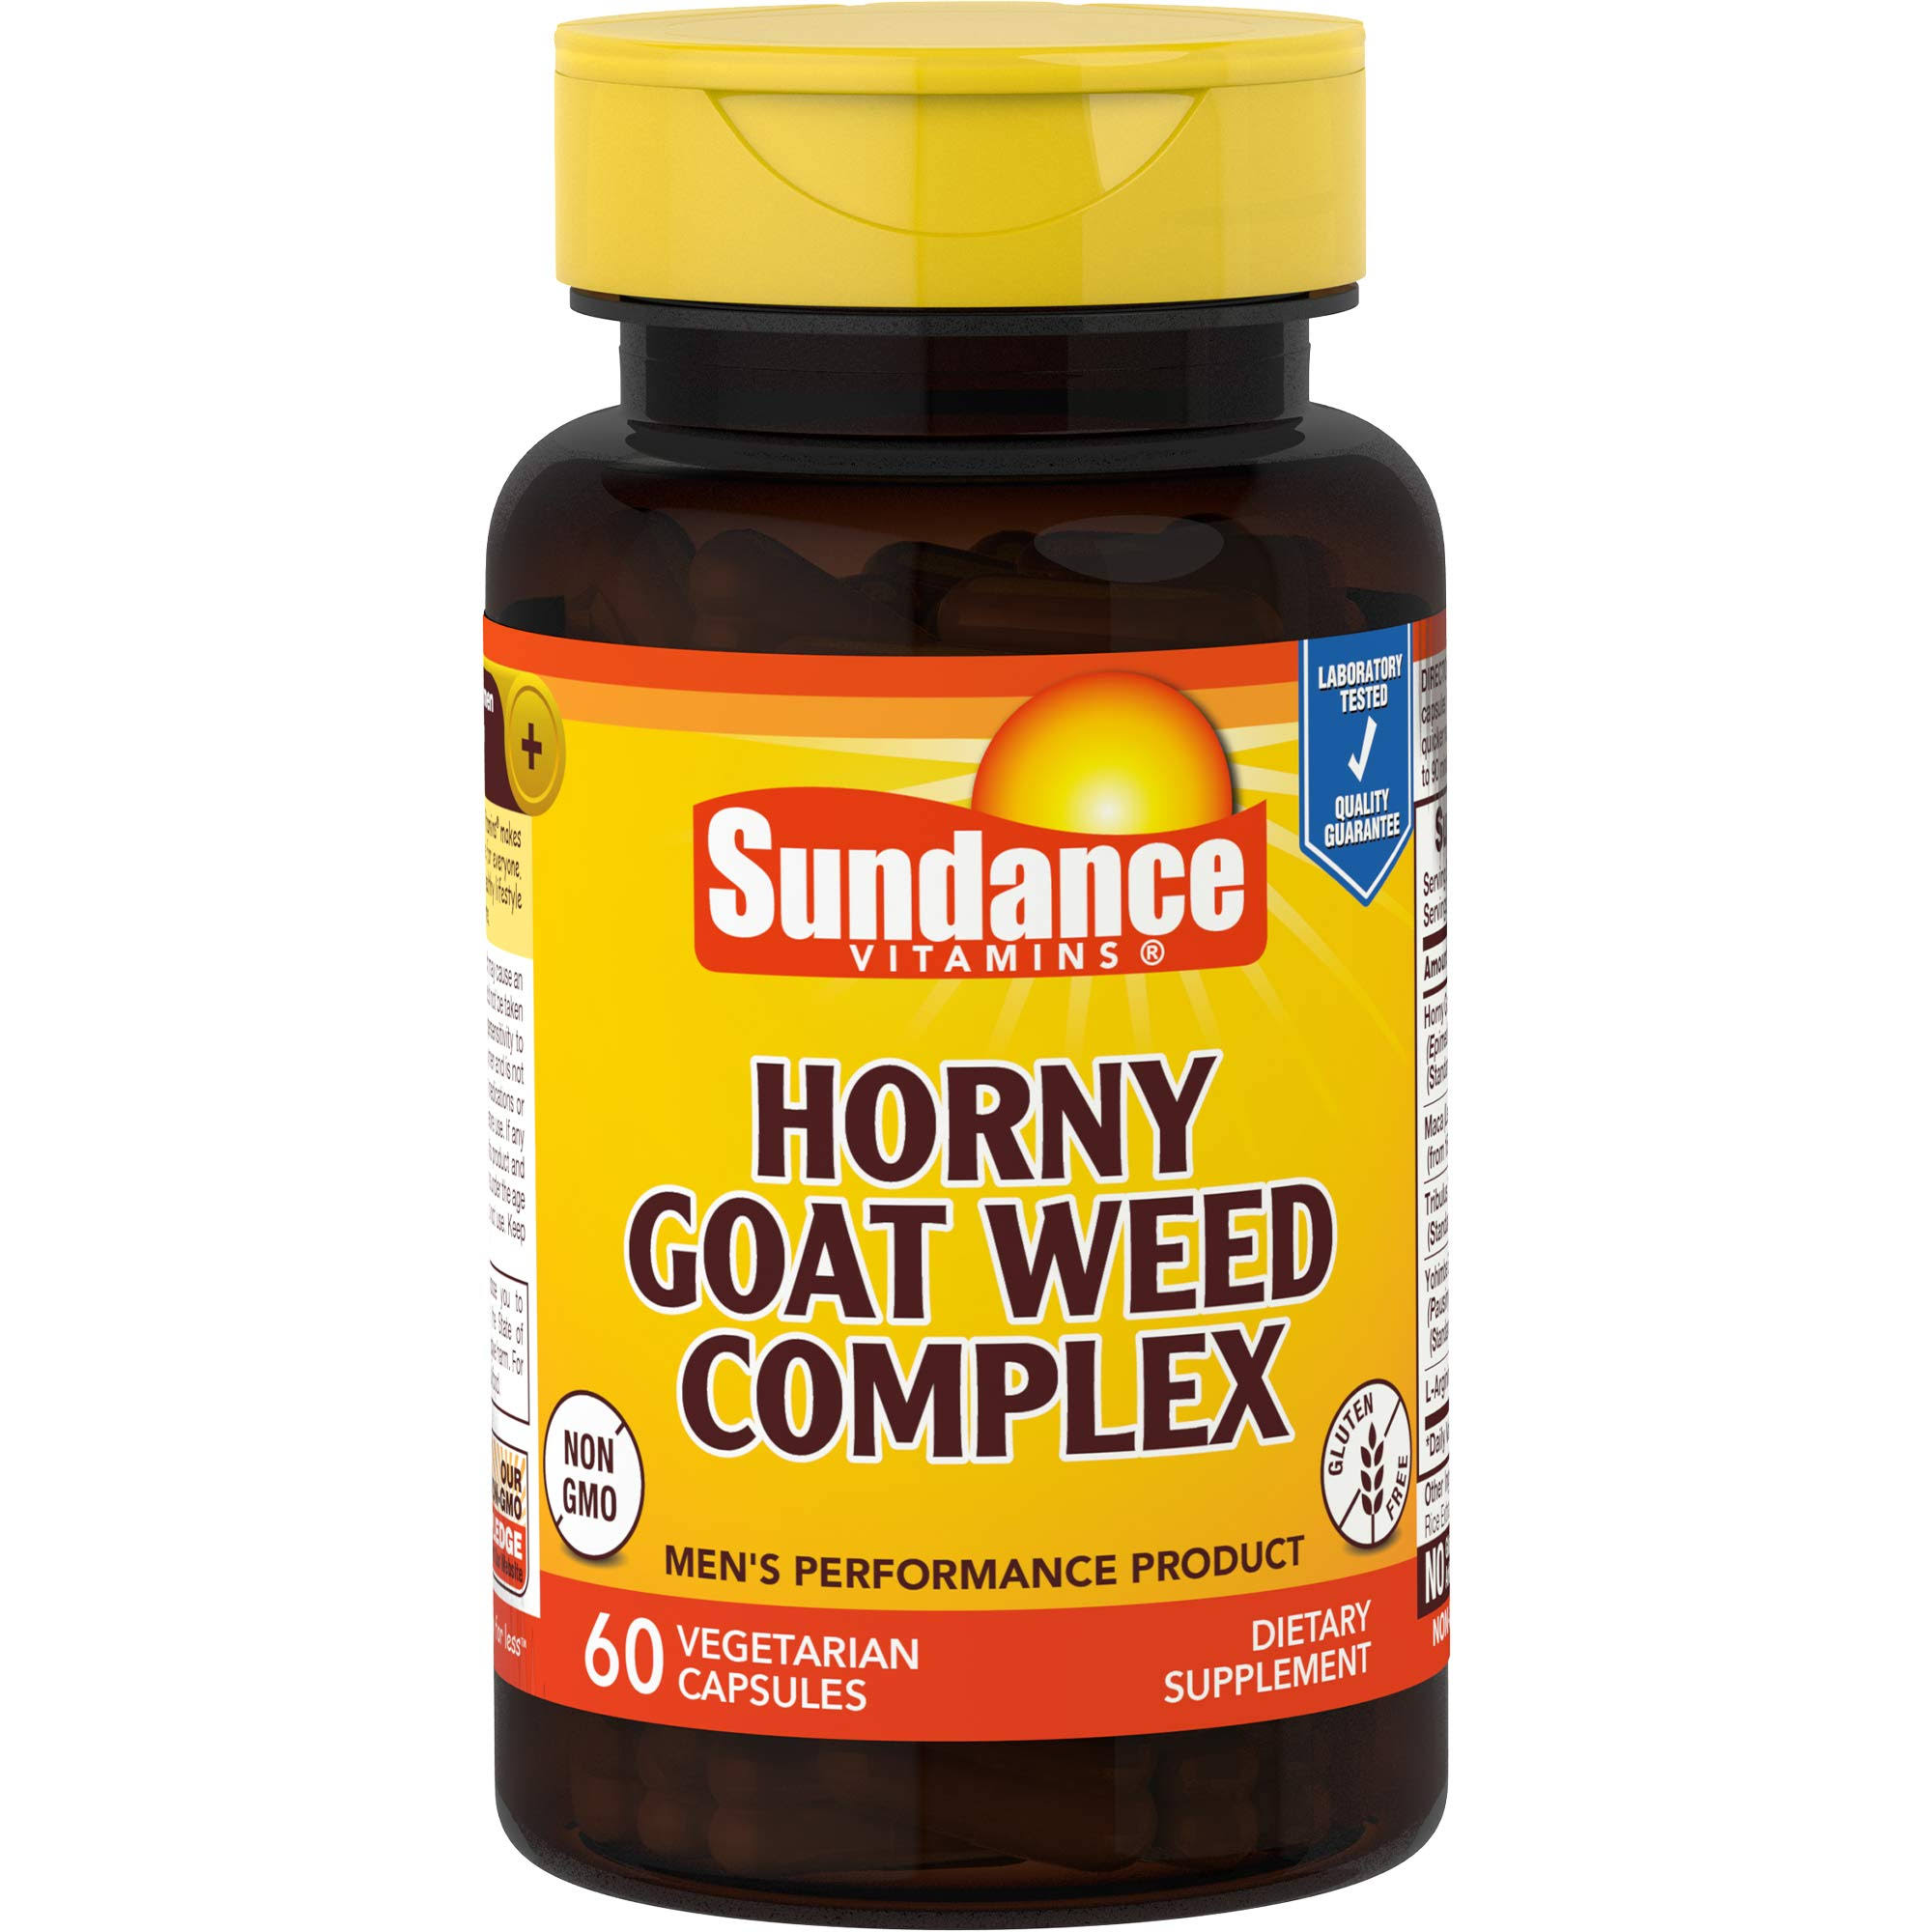 Sundance Horny Goat Weed Complex Dietary Supplement - 60ct